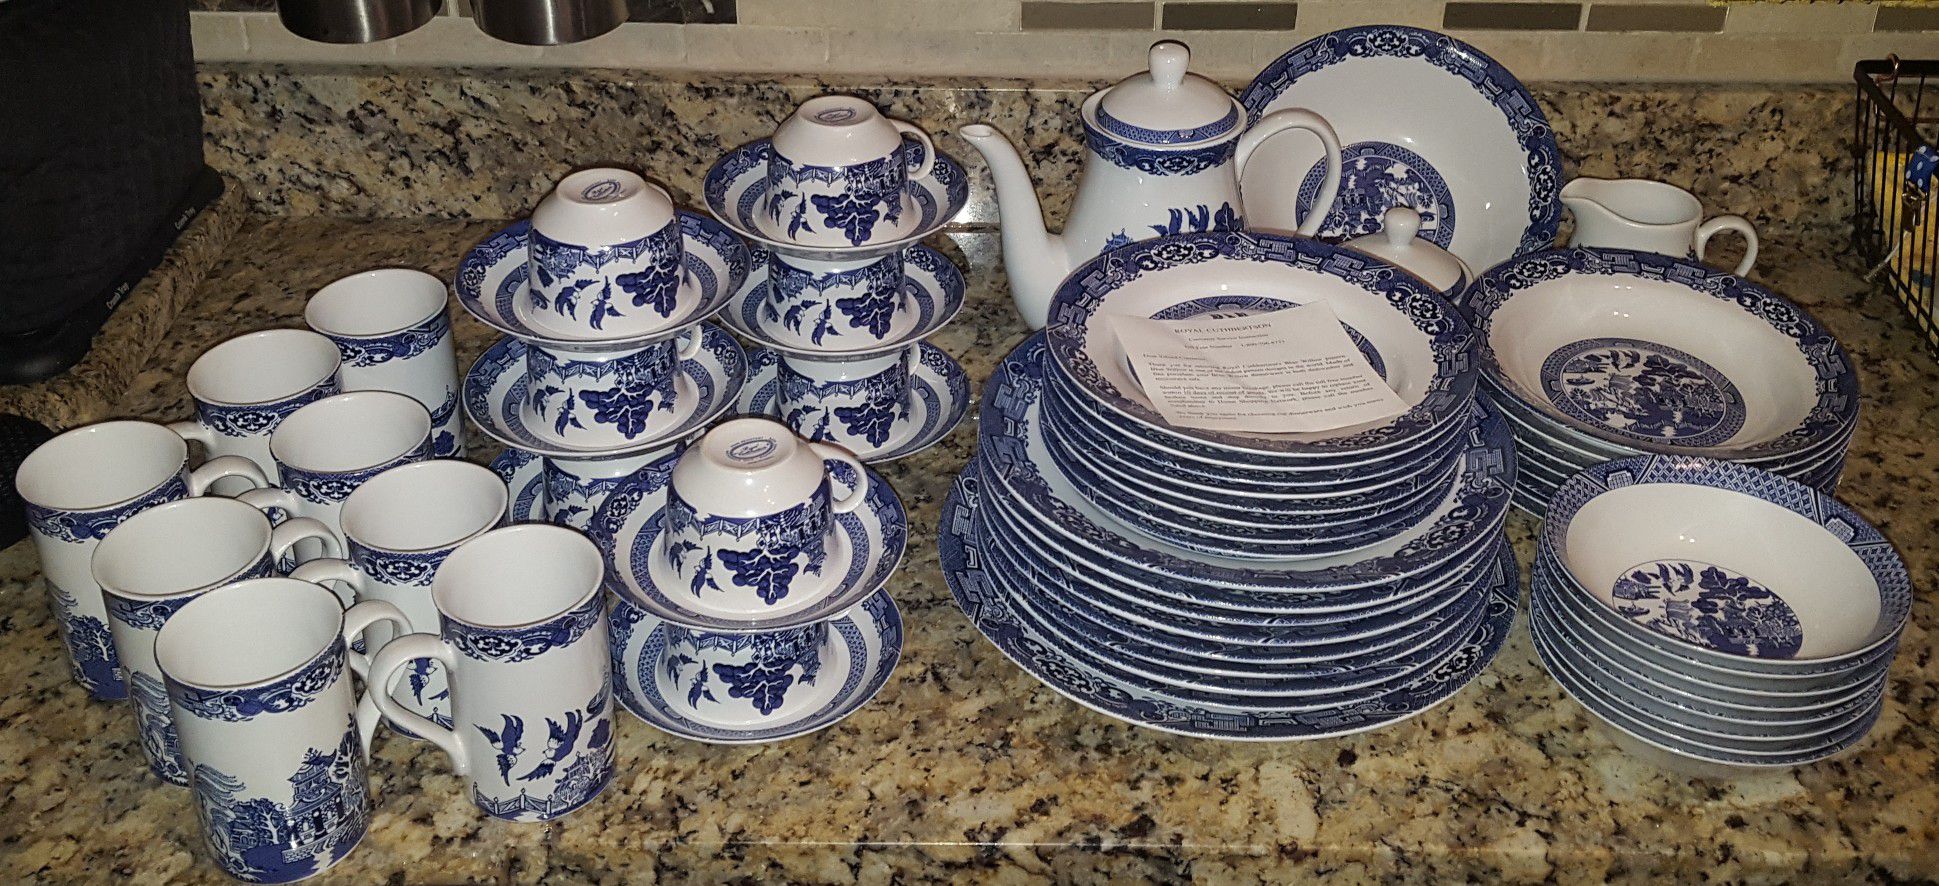 62 Piece Lot - Royal Cuthbertson Blue Willow China Large Lot Unused Open Box